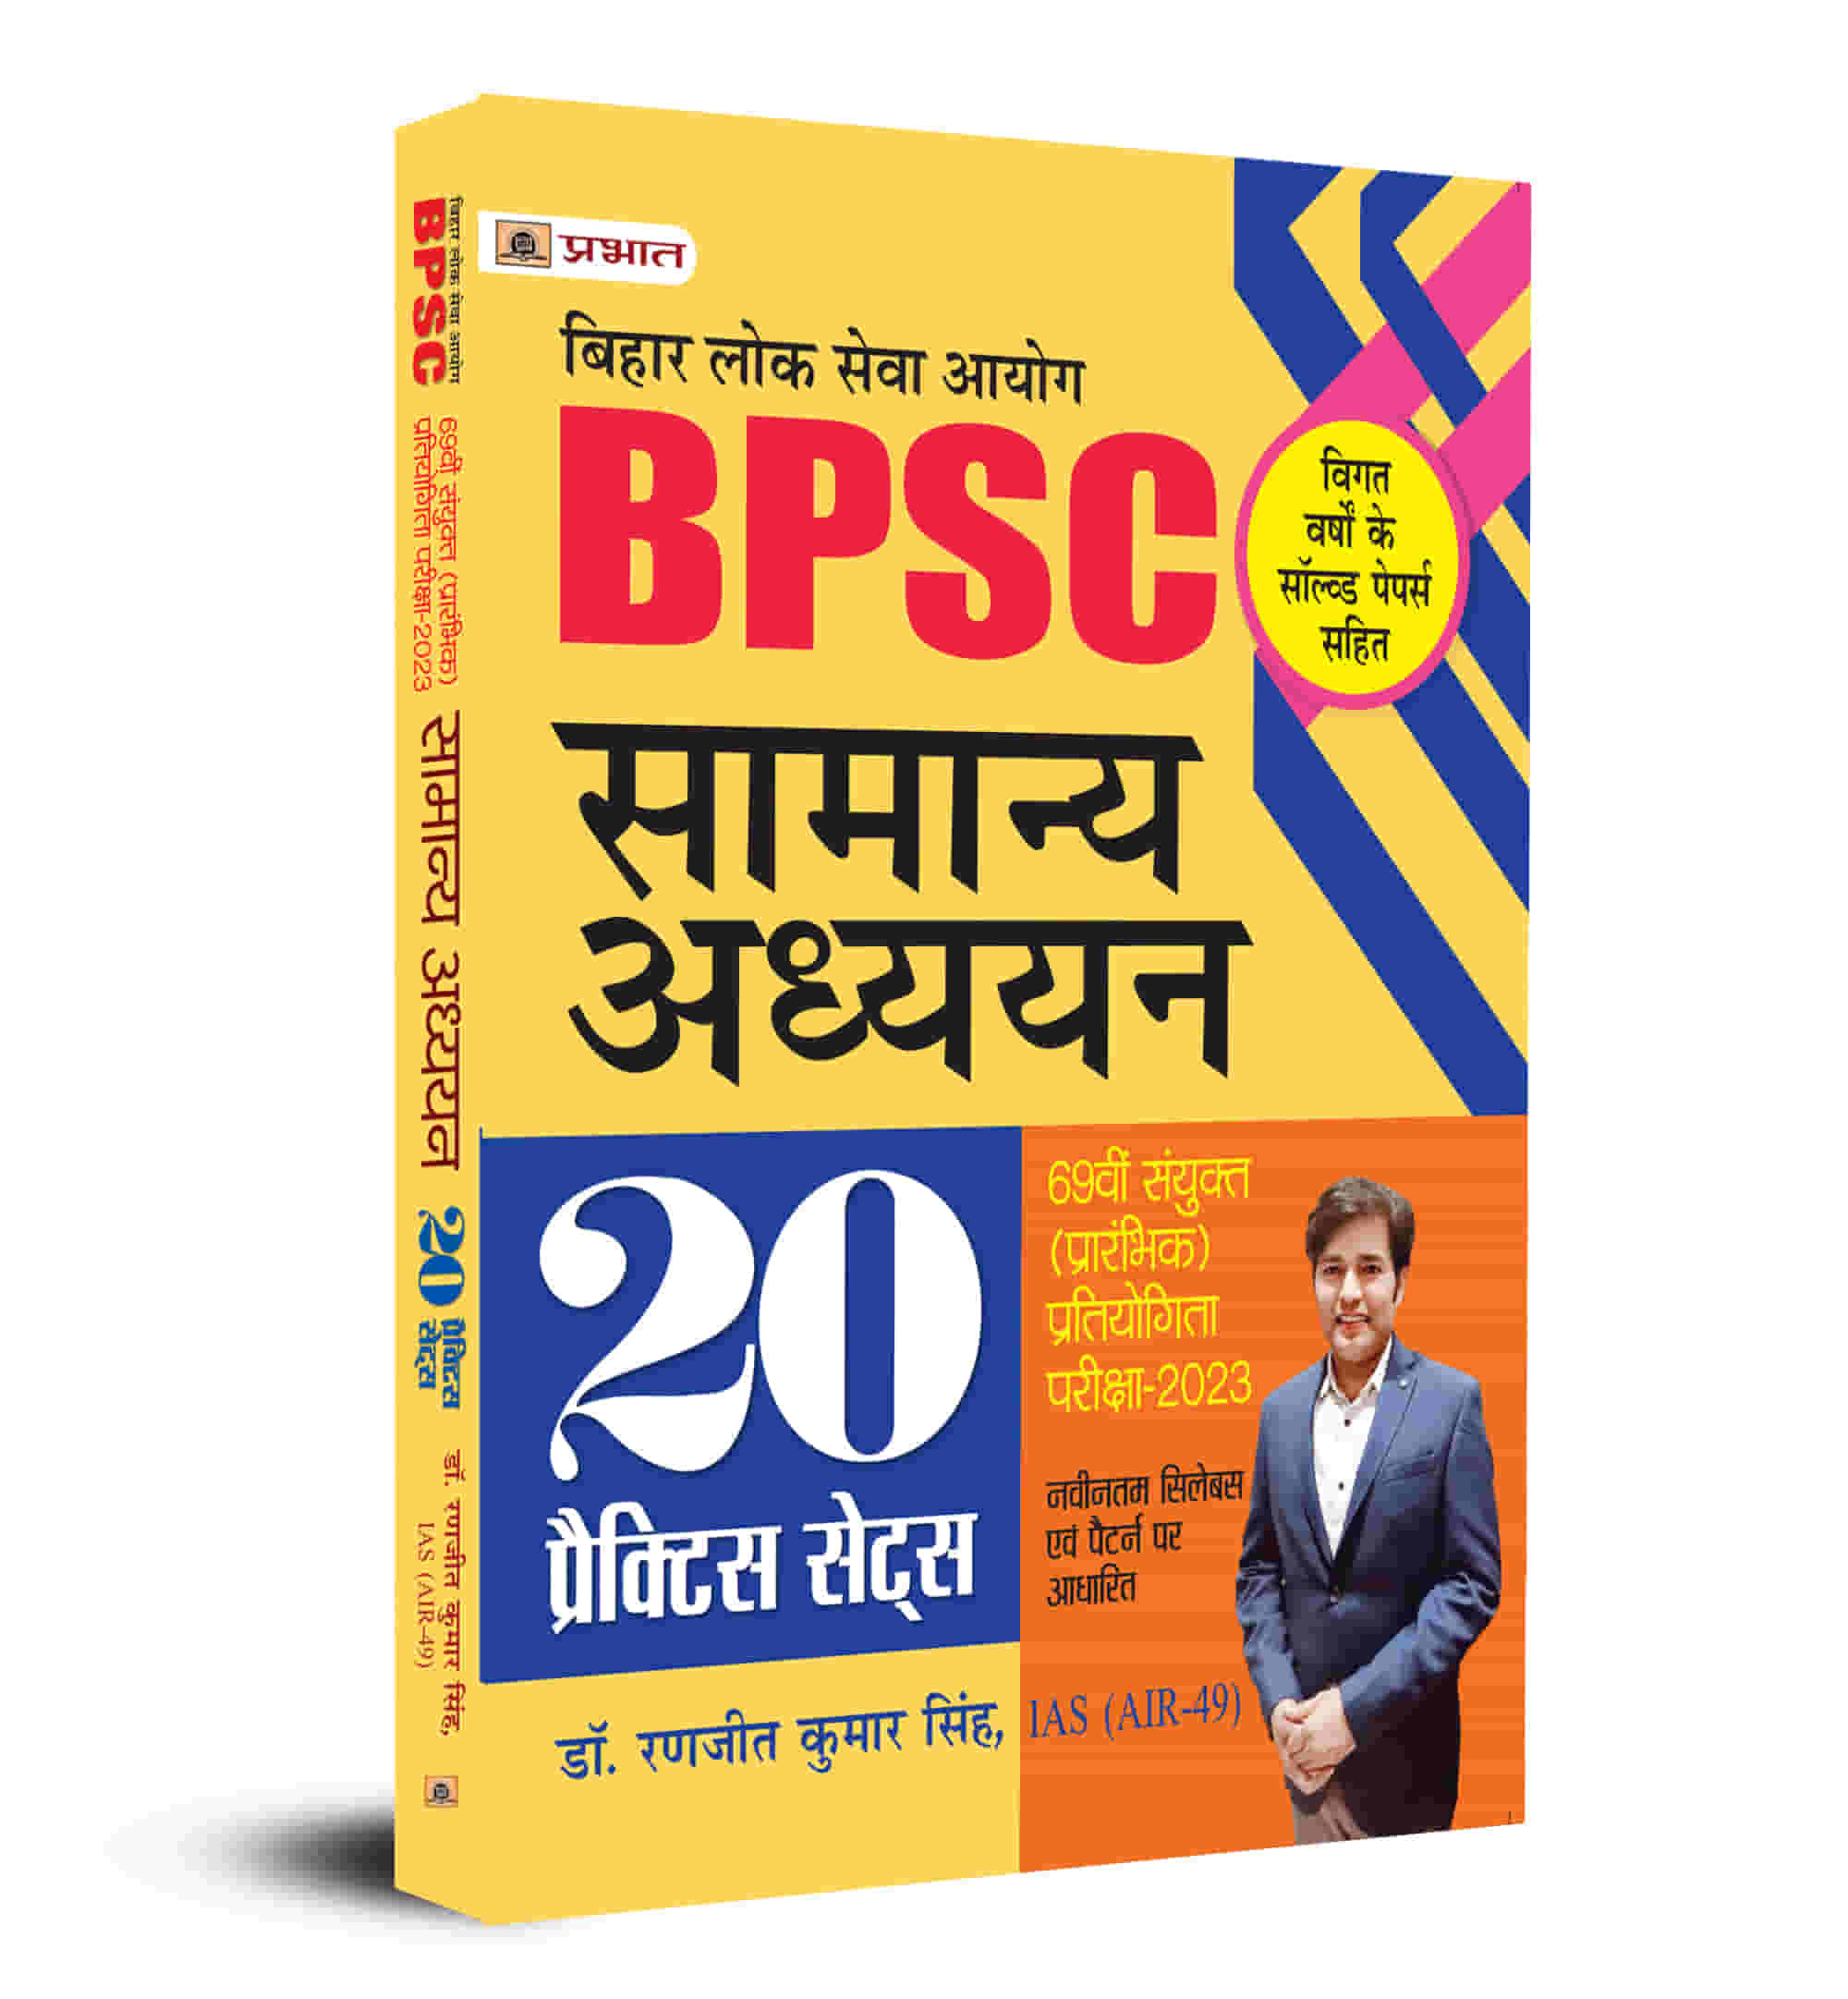 BPSC Bihar Public Service Commission Combined Primary Competitive Exam -2023 General Studies 20 Practice Sets Book In Hindi 